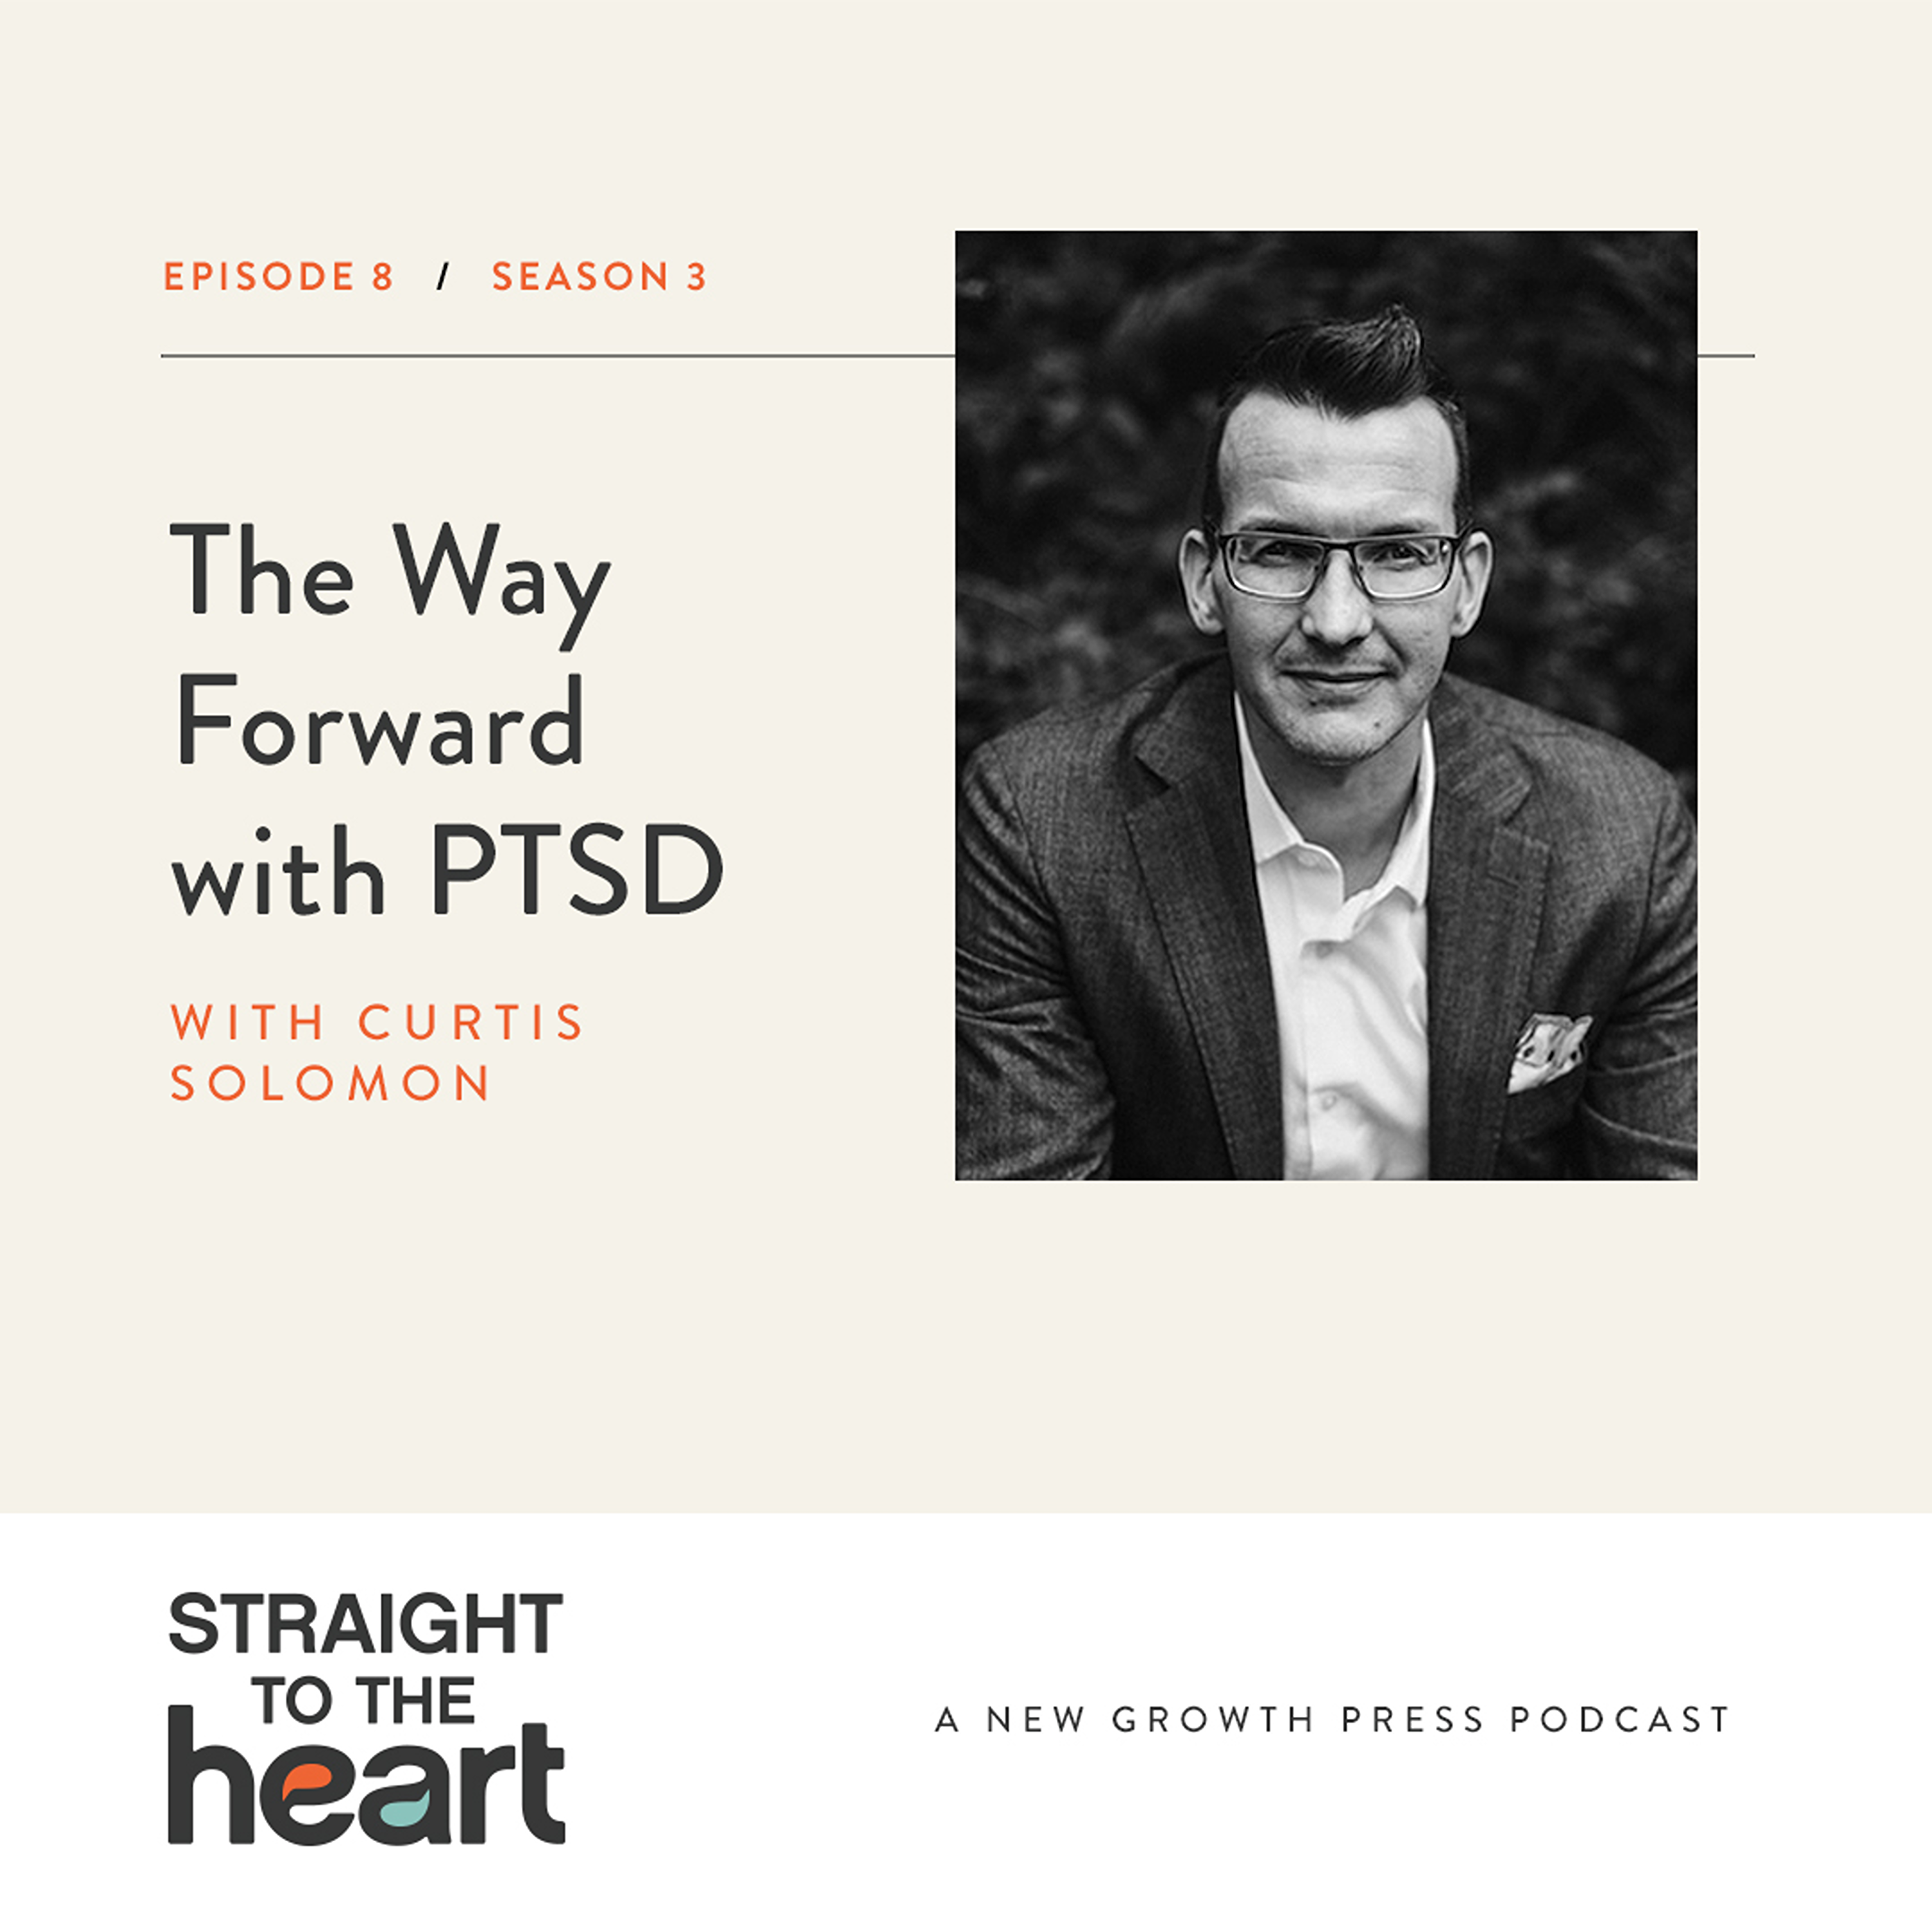 The Way Forward with PTSD with Curtis Solomon